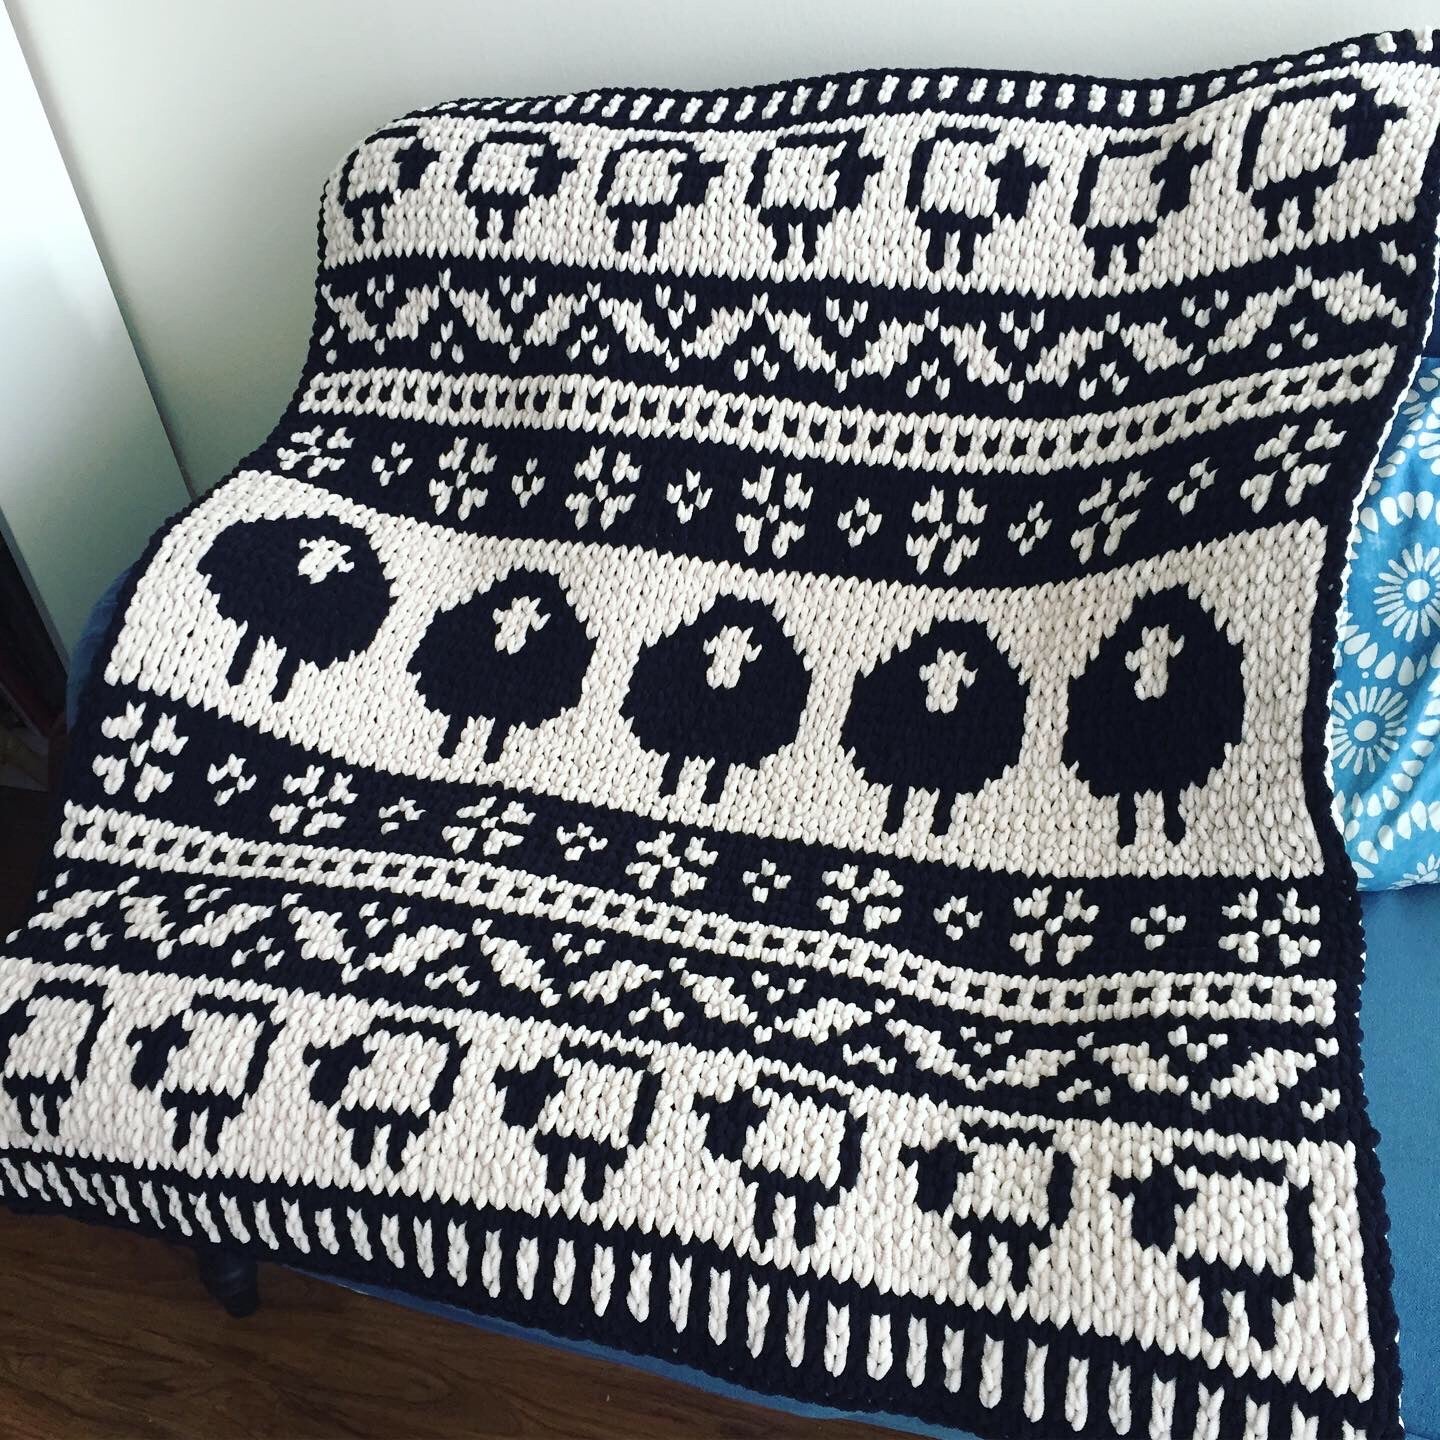 Top crochet afghan patterns - Gathered